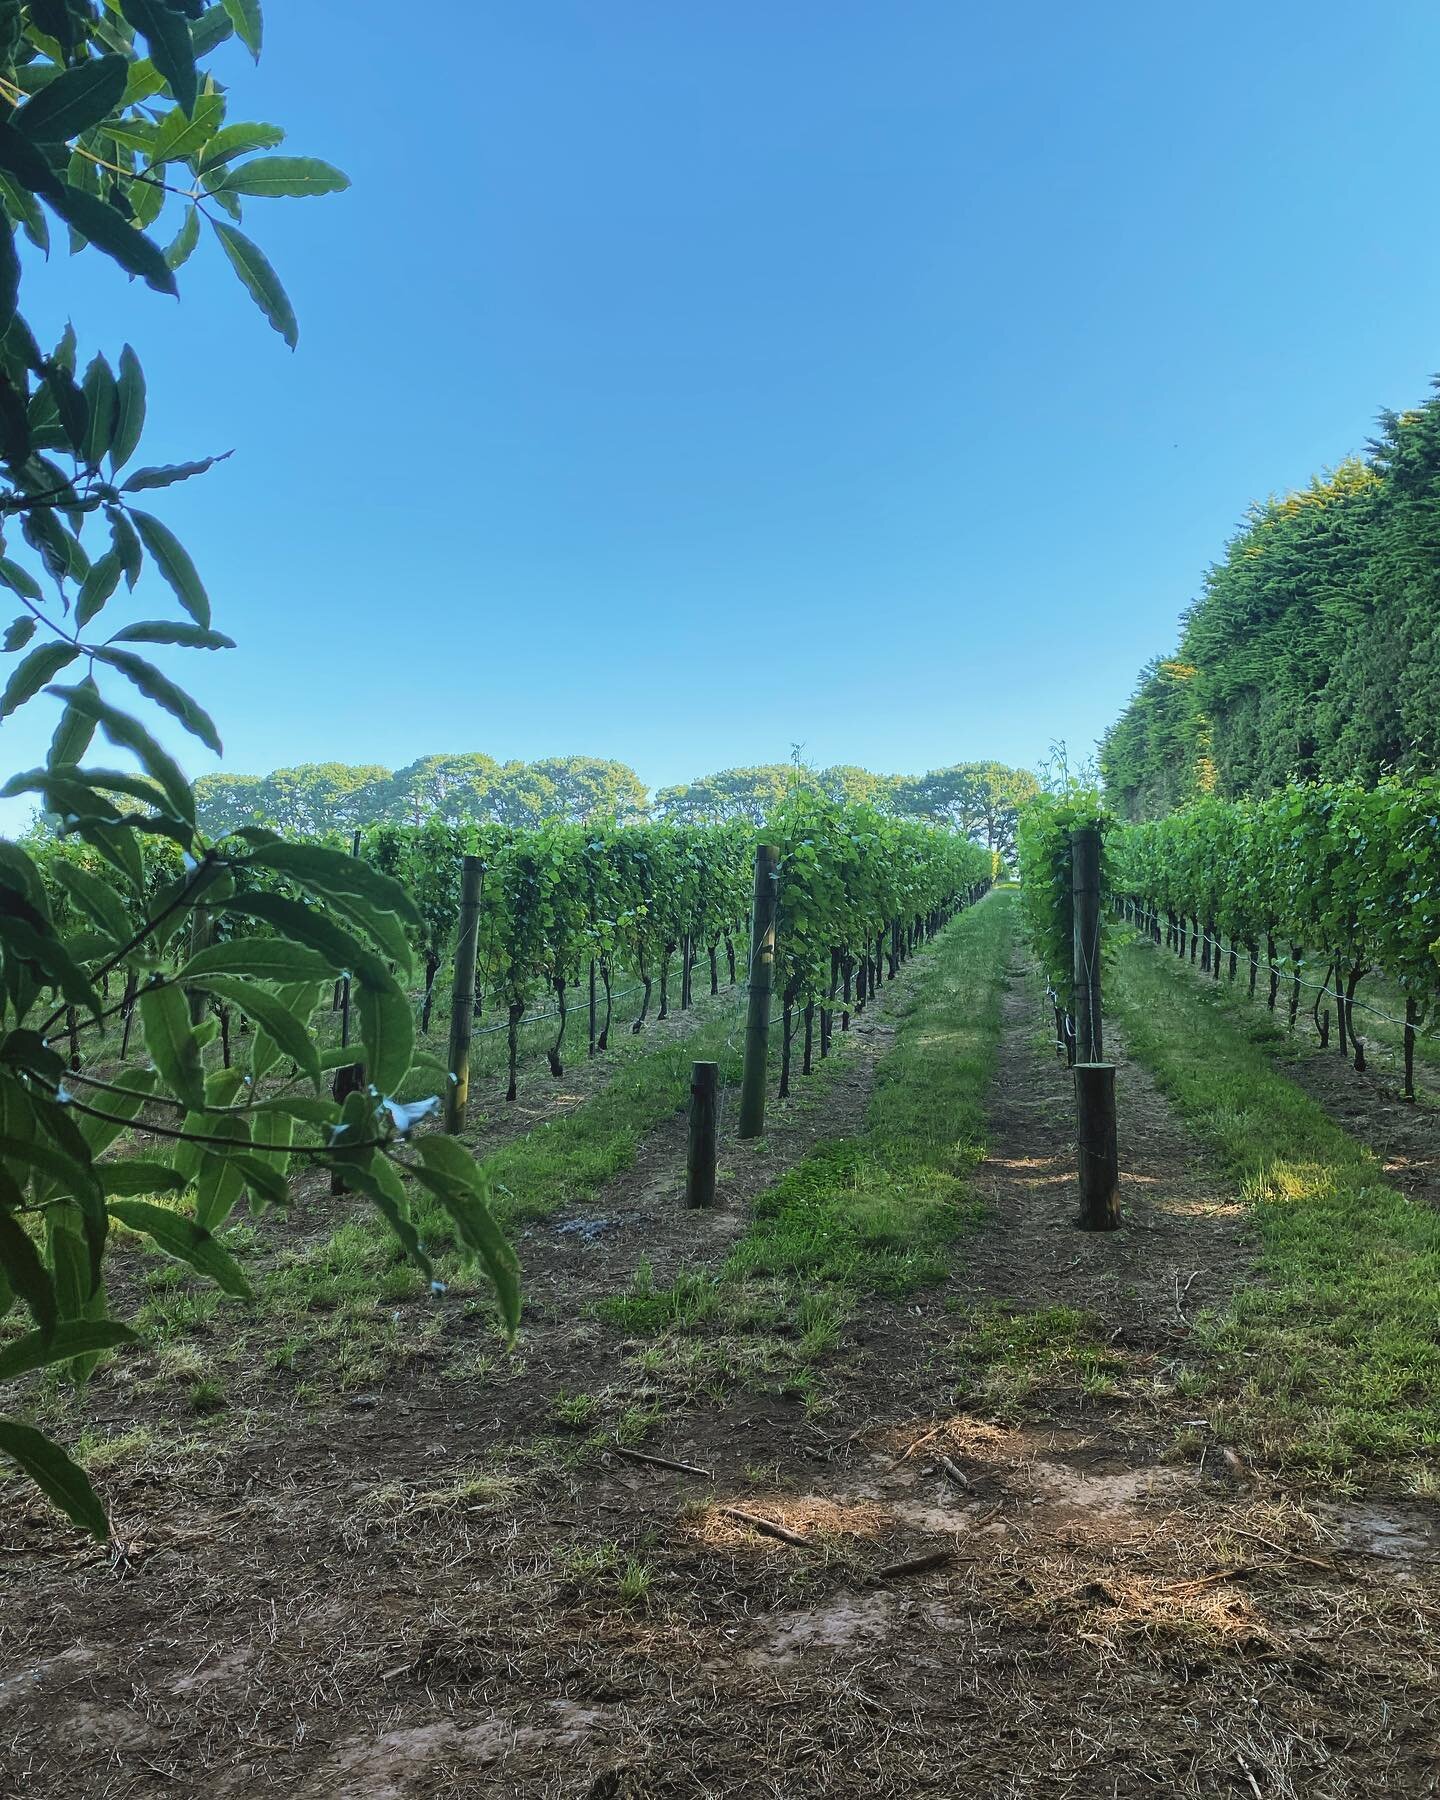 Daily fix of green on the Merricks-Red Hill trail 5 minutes walk from Elsewhere! Local vineyards are looking lush.